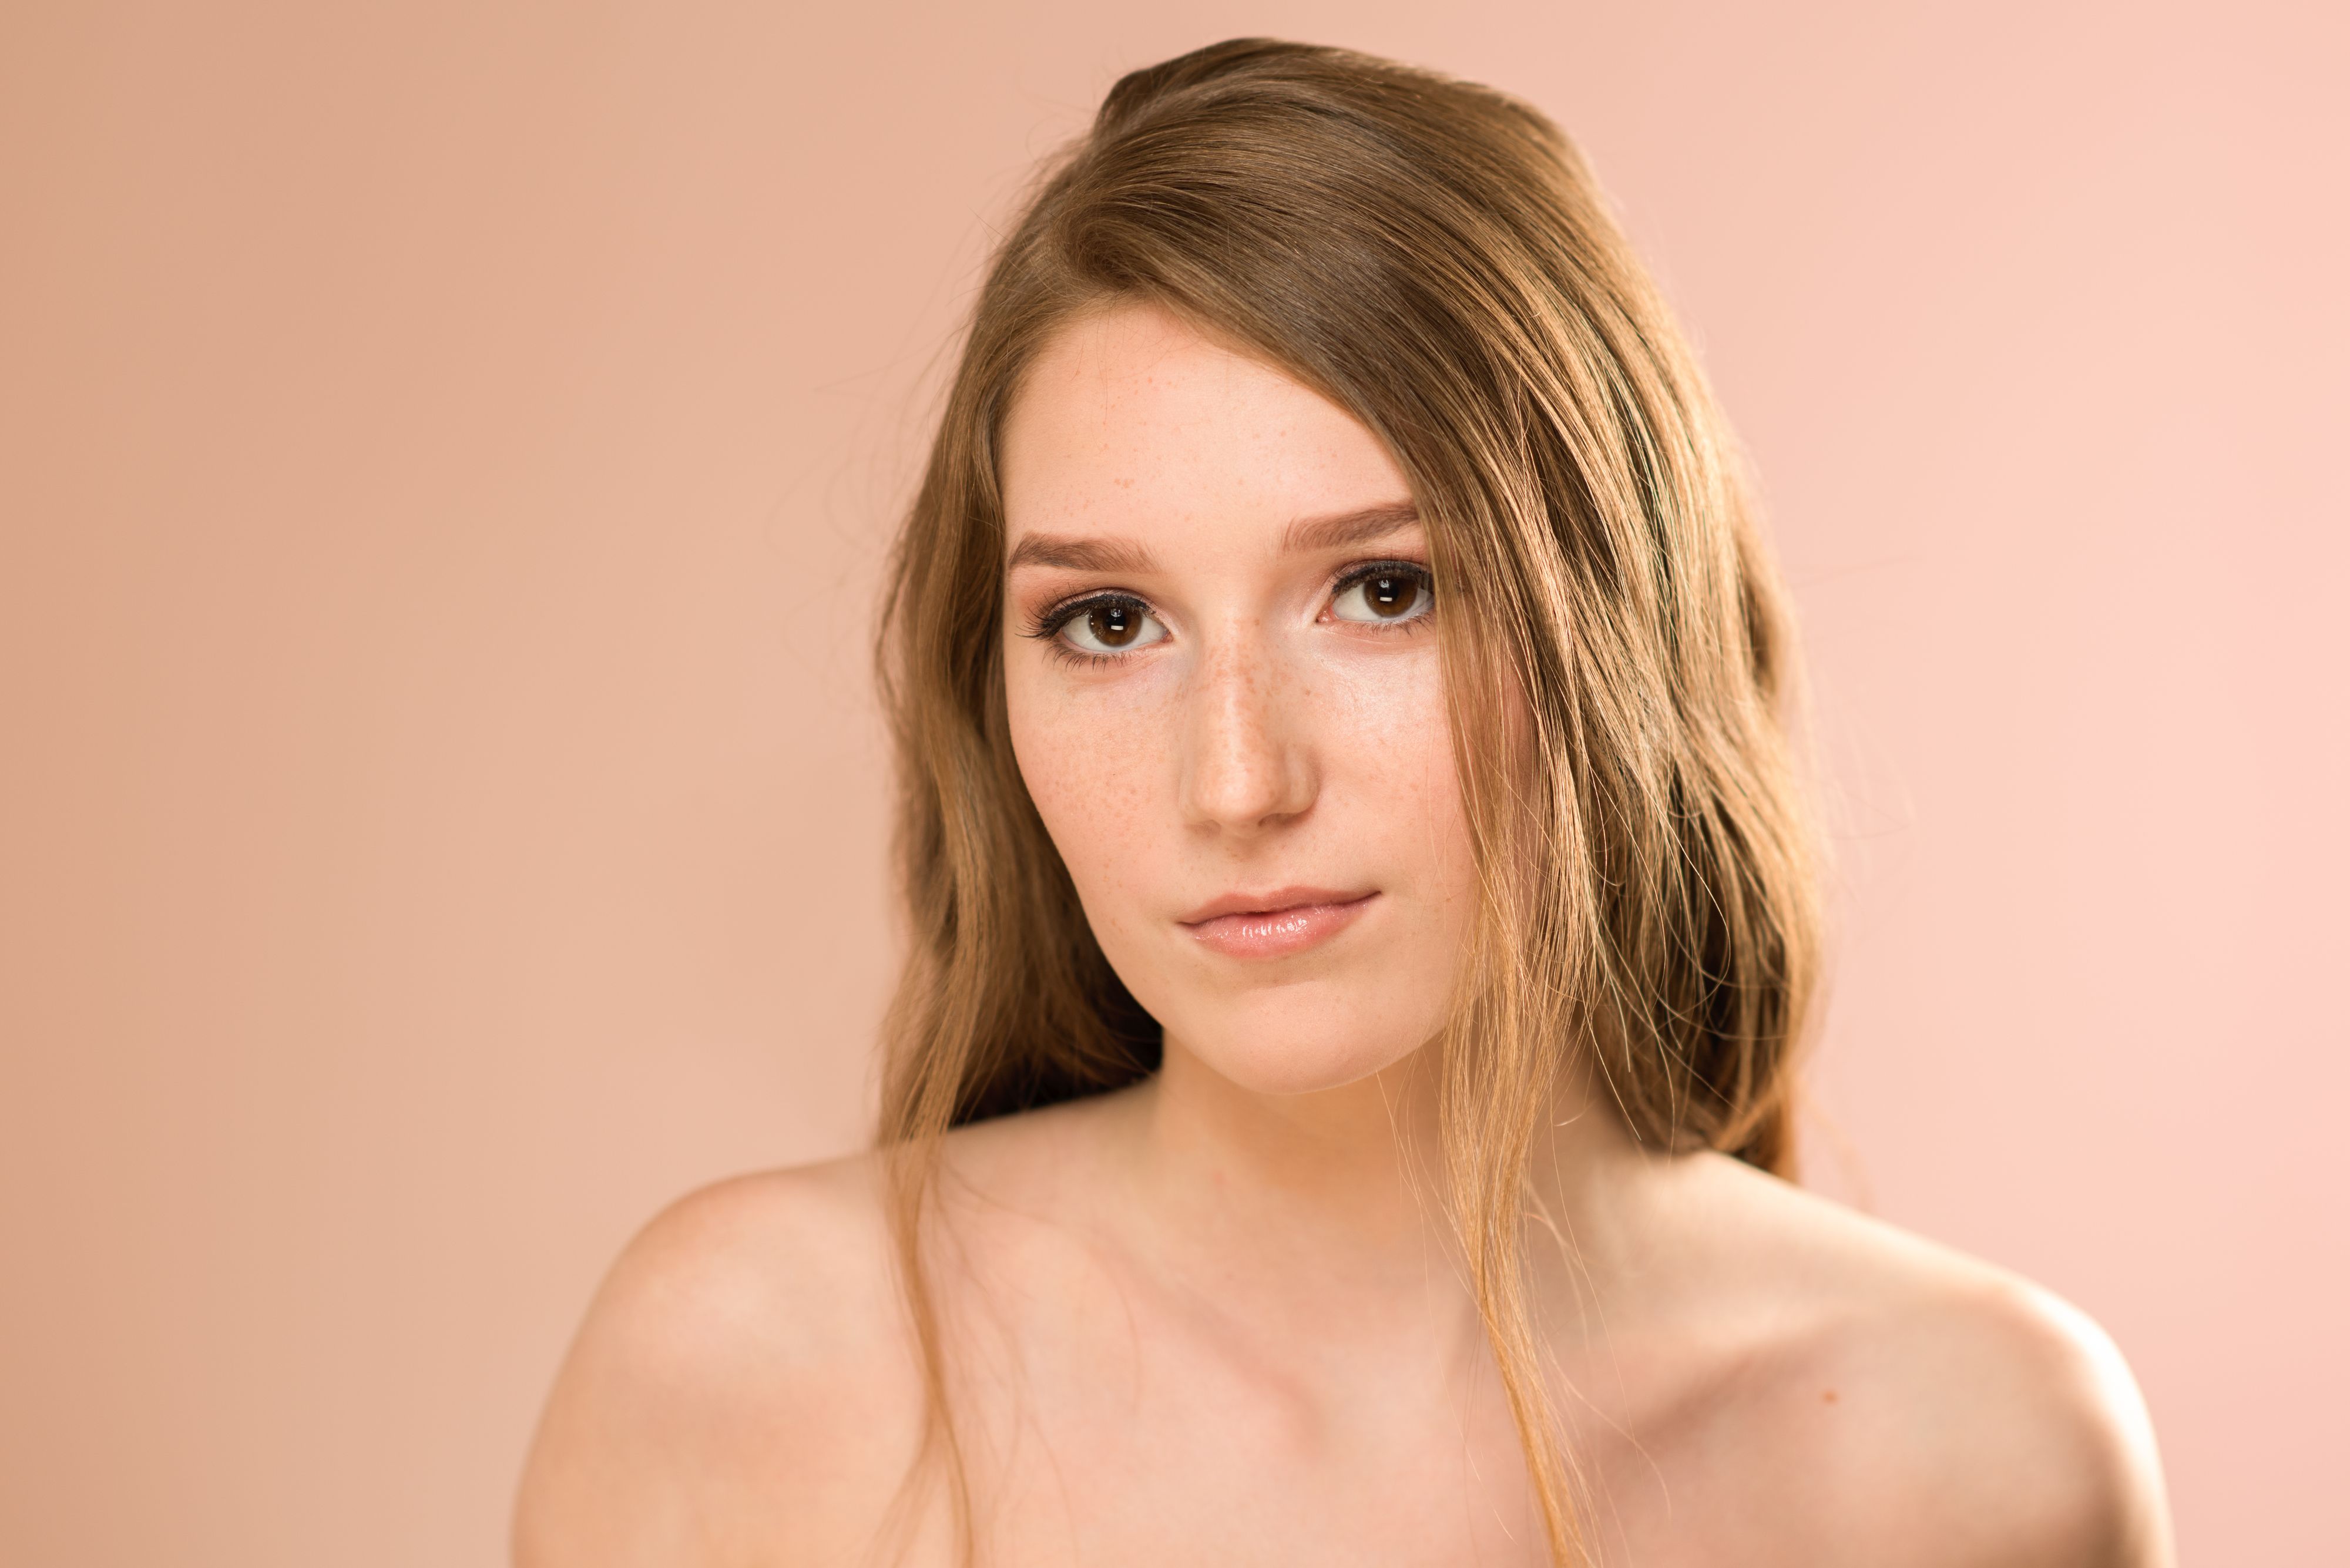 Topless female model beauty on pink background